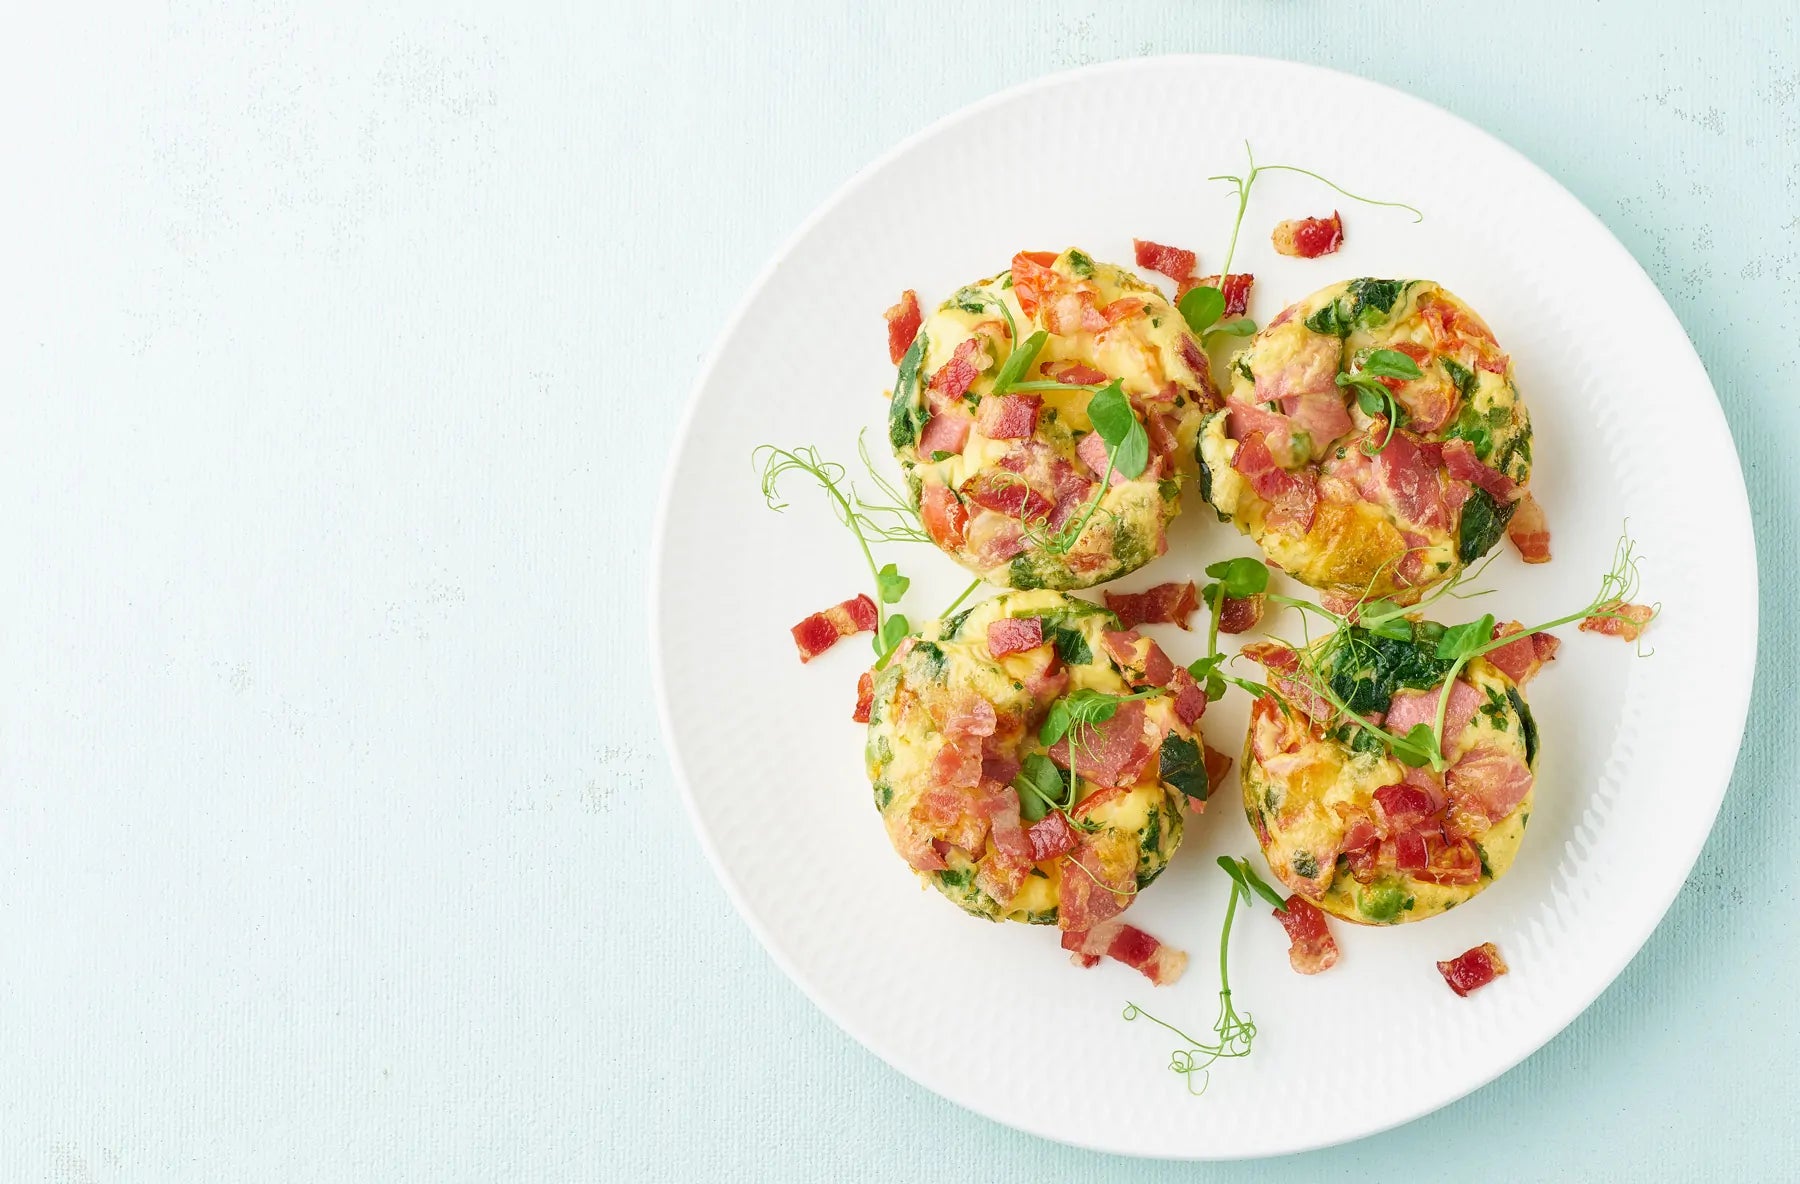 Plate with egg muffins with turkey bacon and herbs